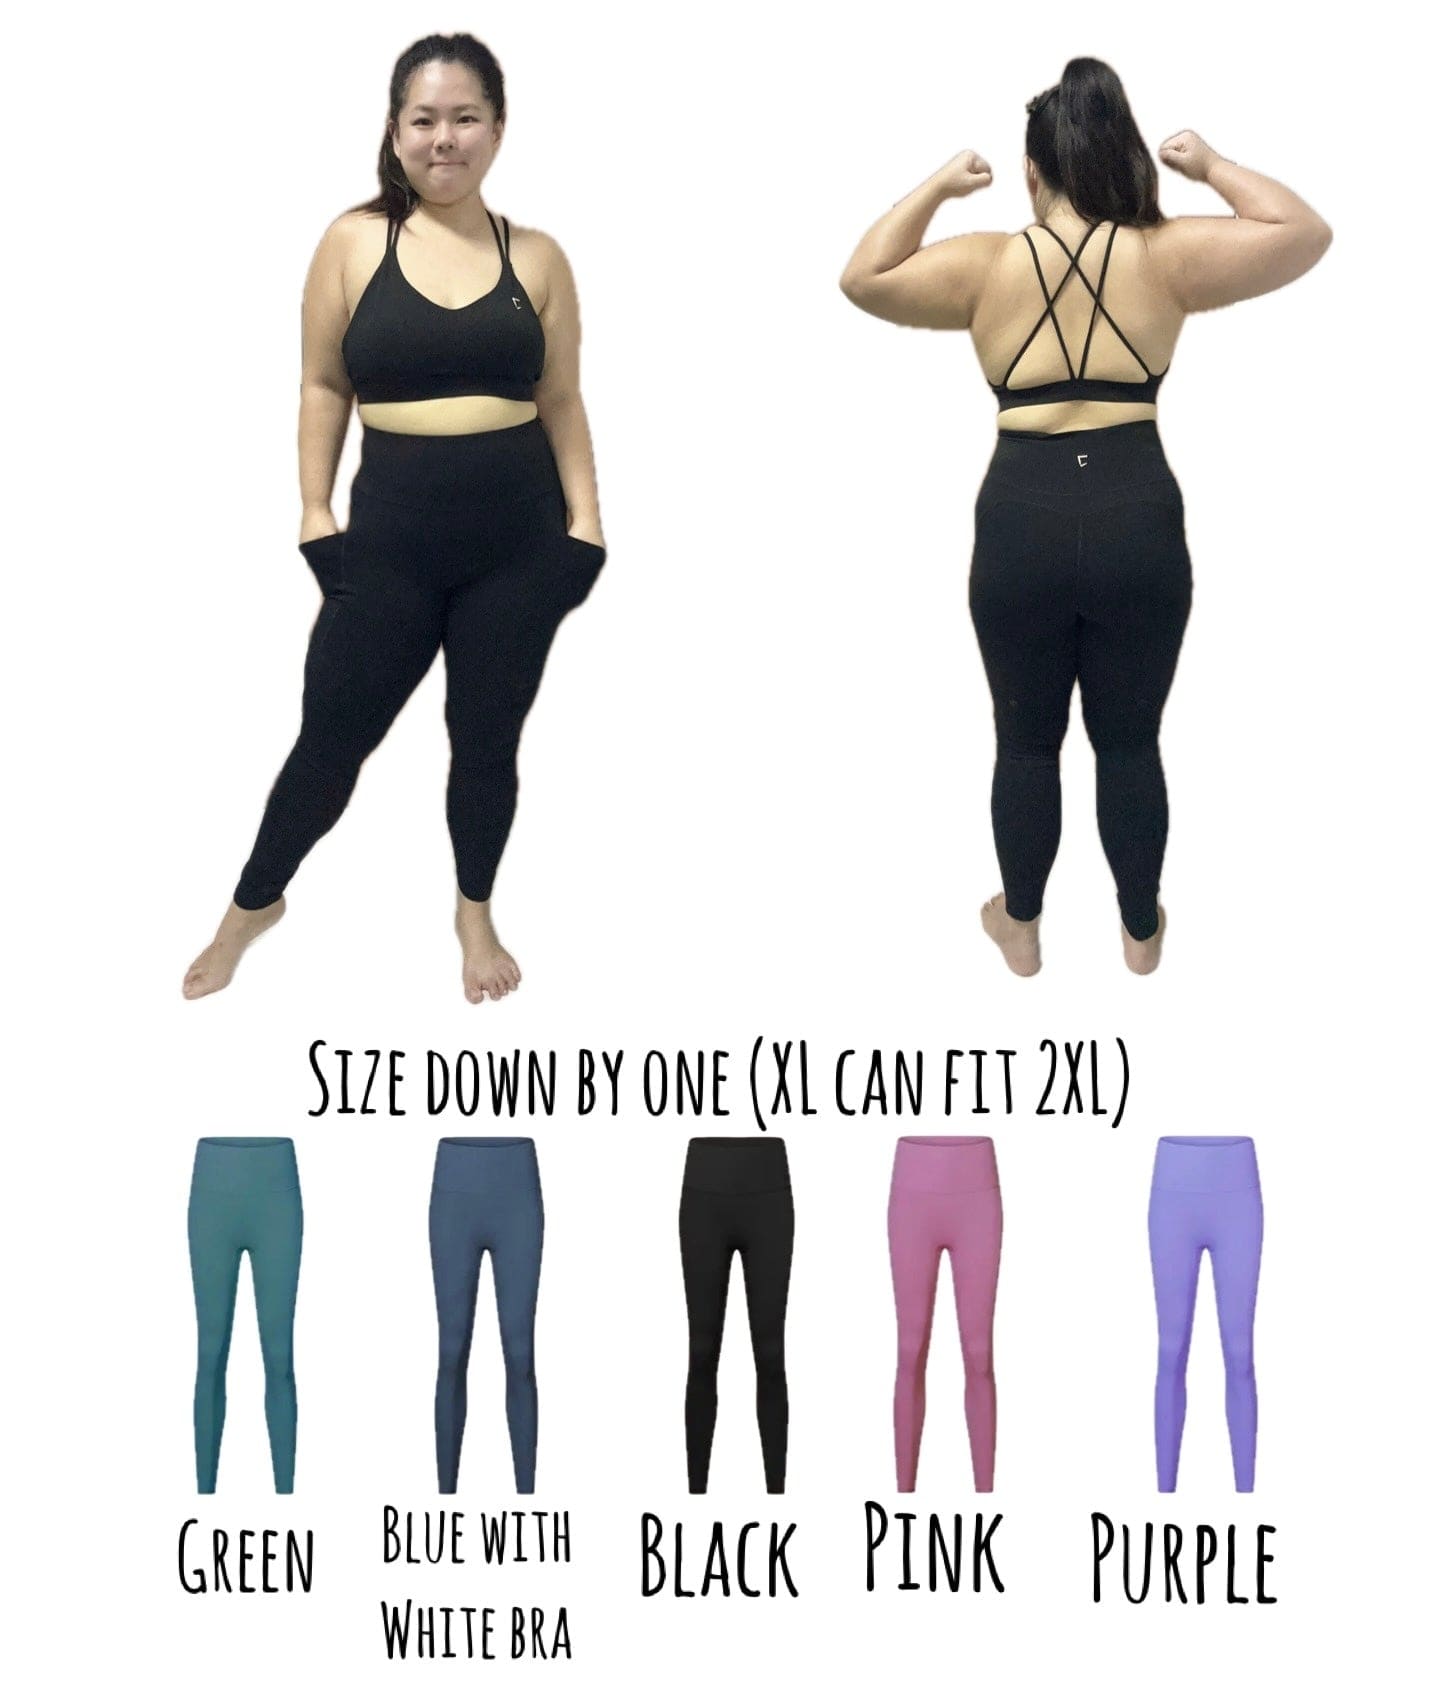 Essential seamless pocket leggings set (do size down by one) XL can fit 2XL - do check if you are okay with the design of the leggings before ordering